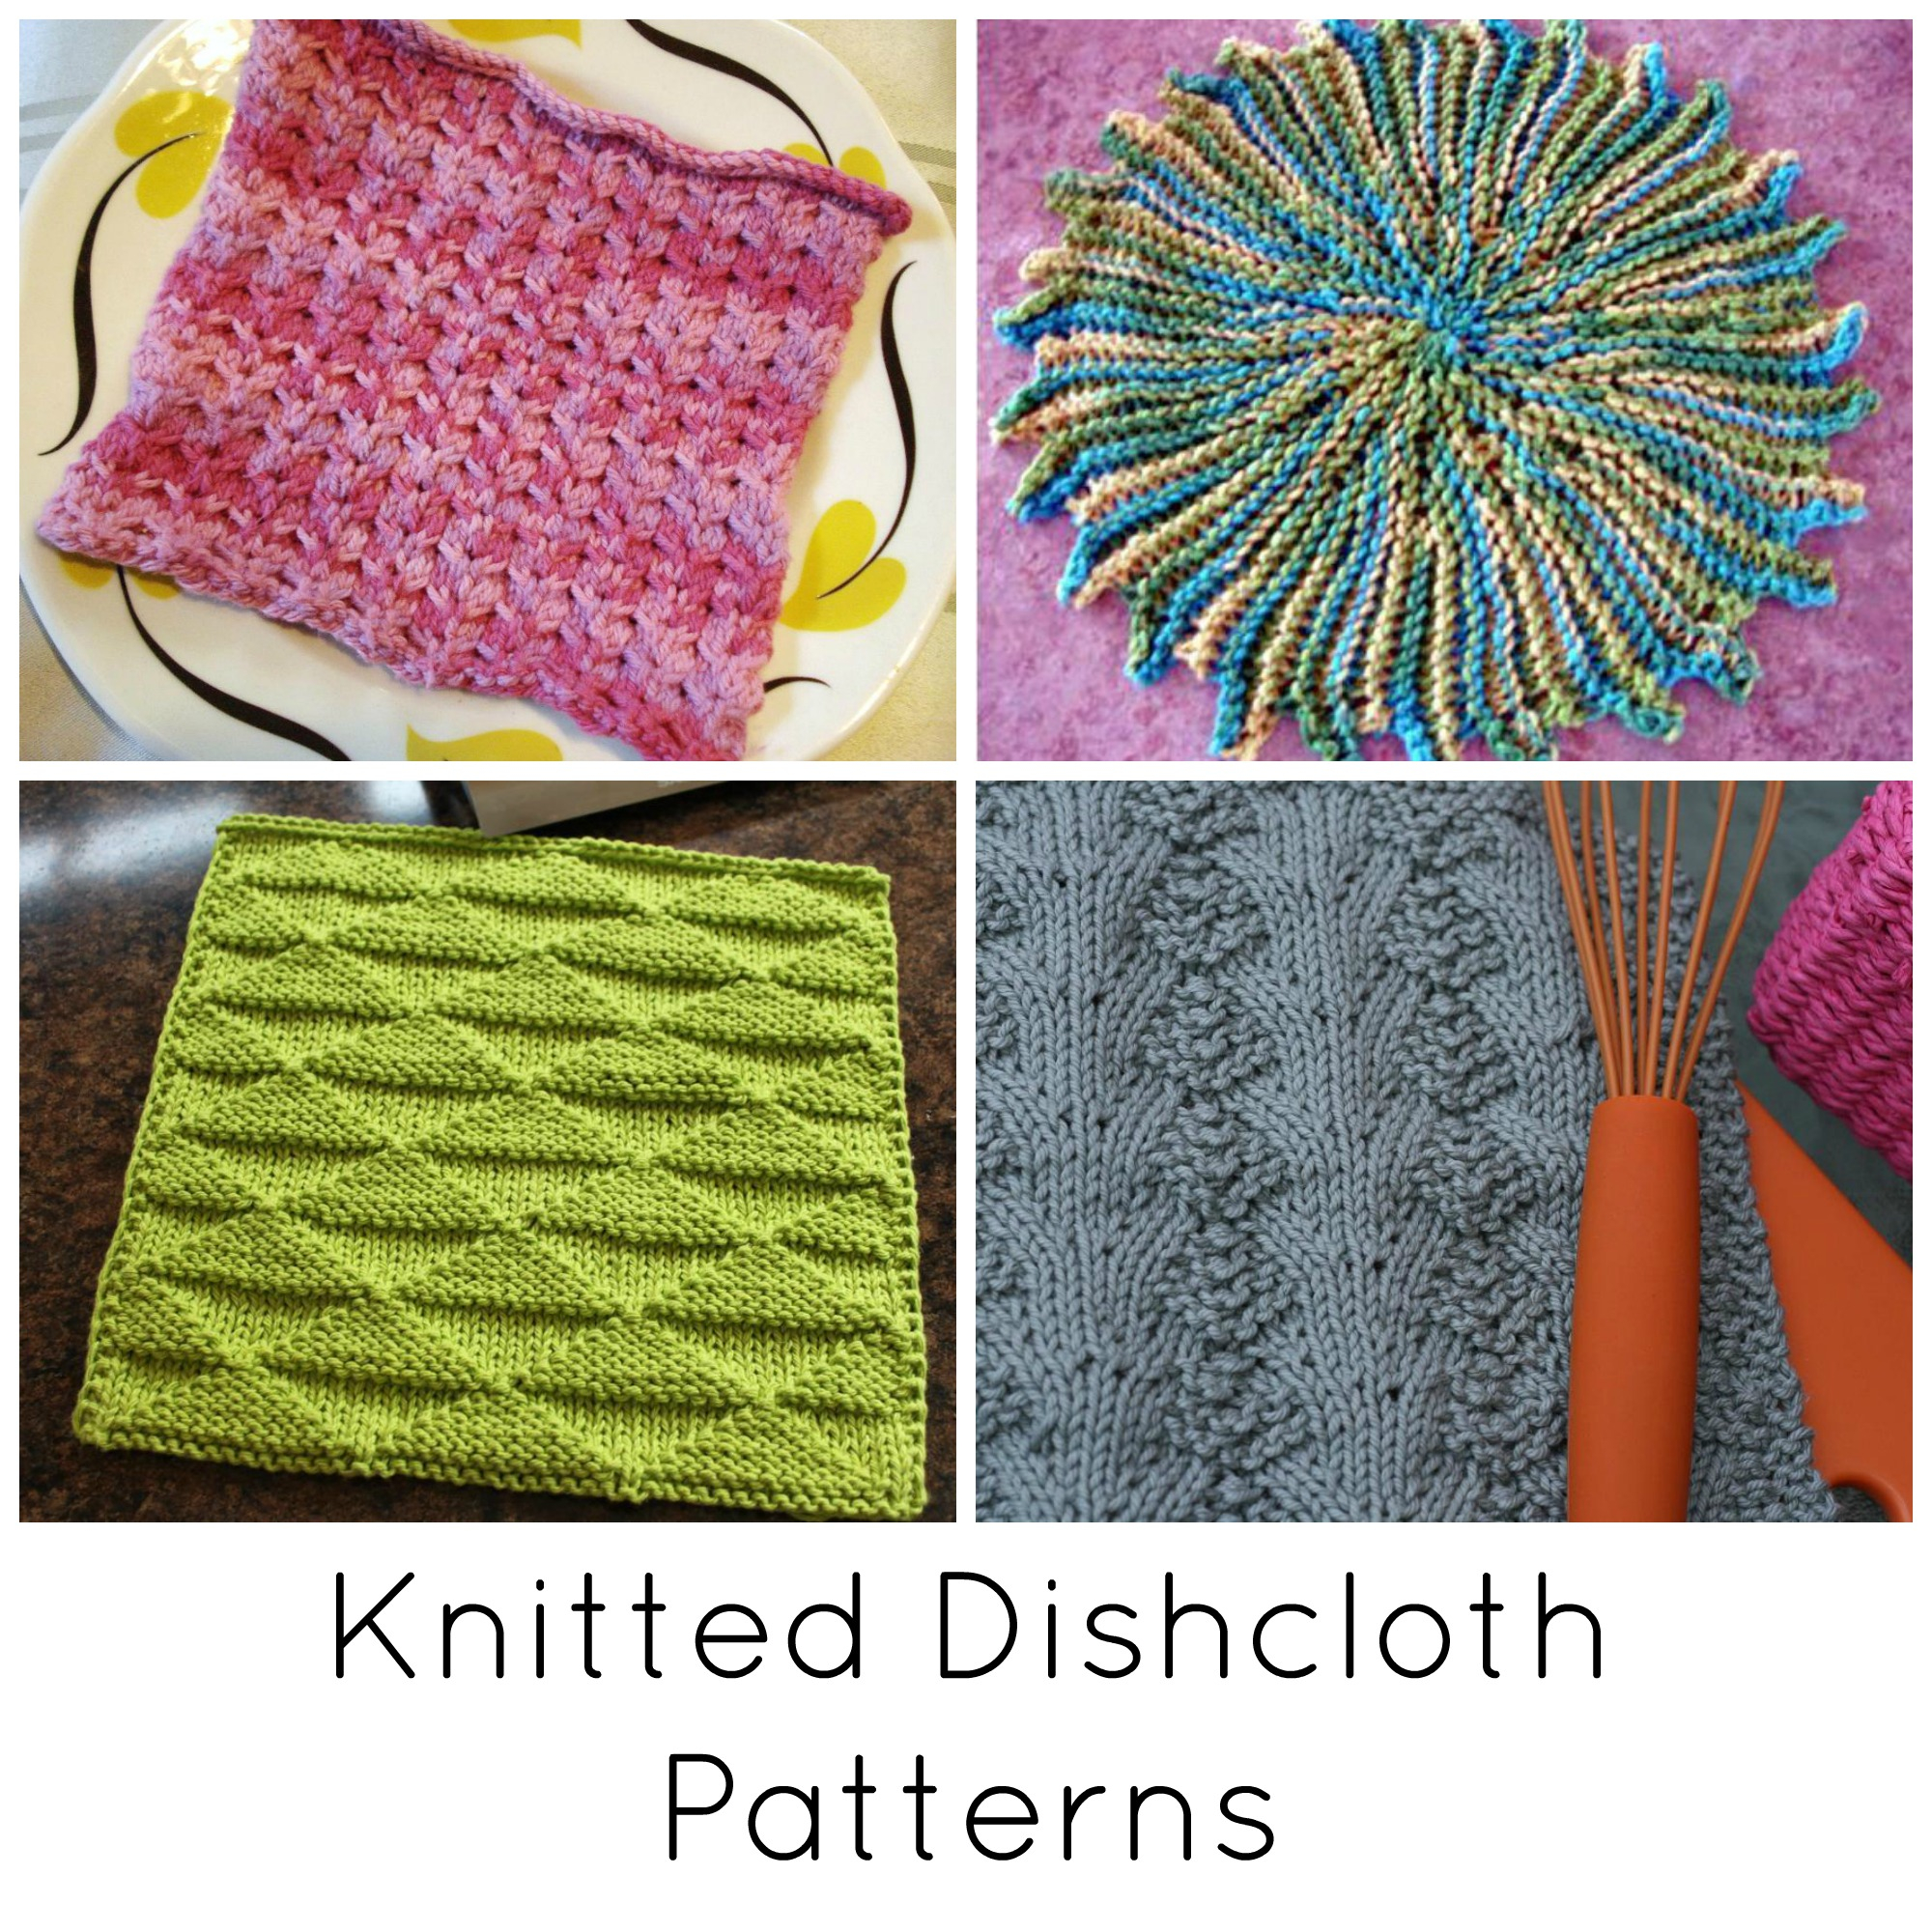 Free Knitted Dishcloth Pattern 10 Quick Knitted Dishcloth Patterns